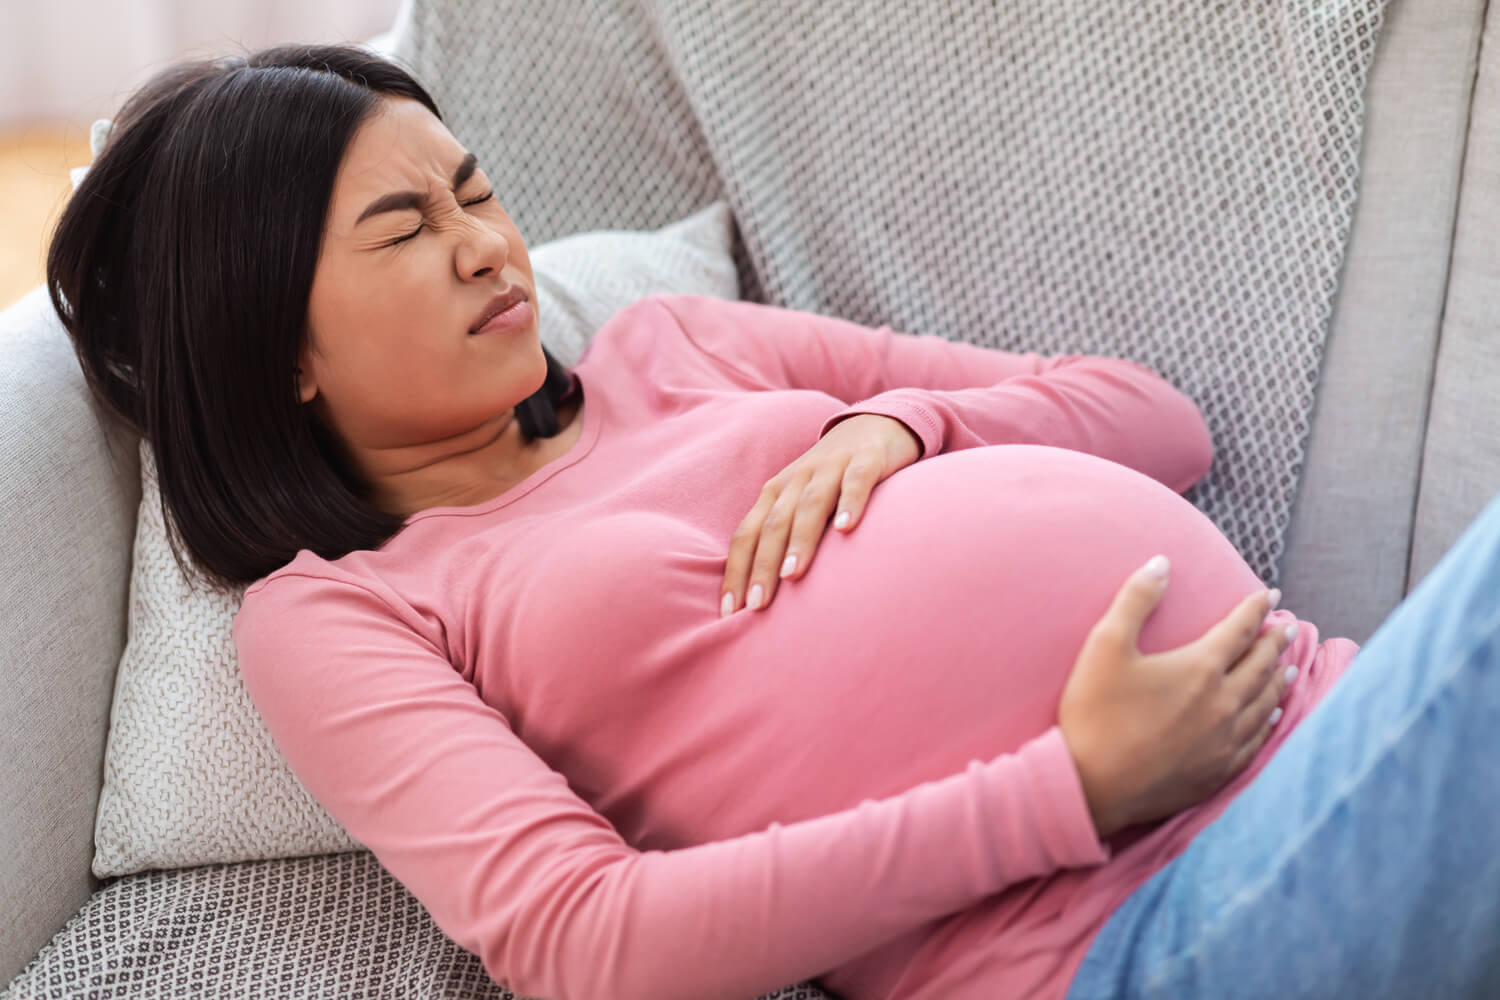 What Are The Signs and Symptoms Of A Premature Delivery